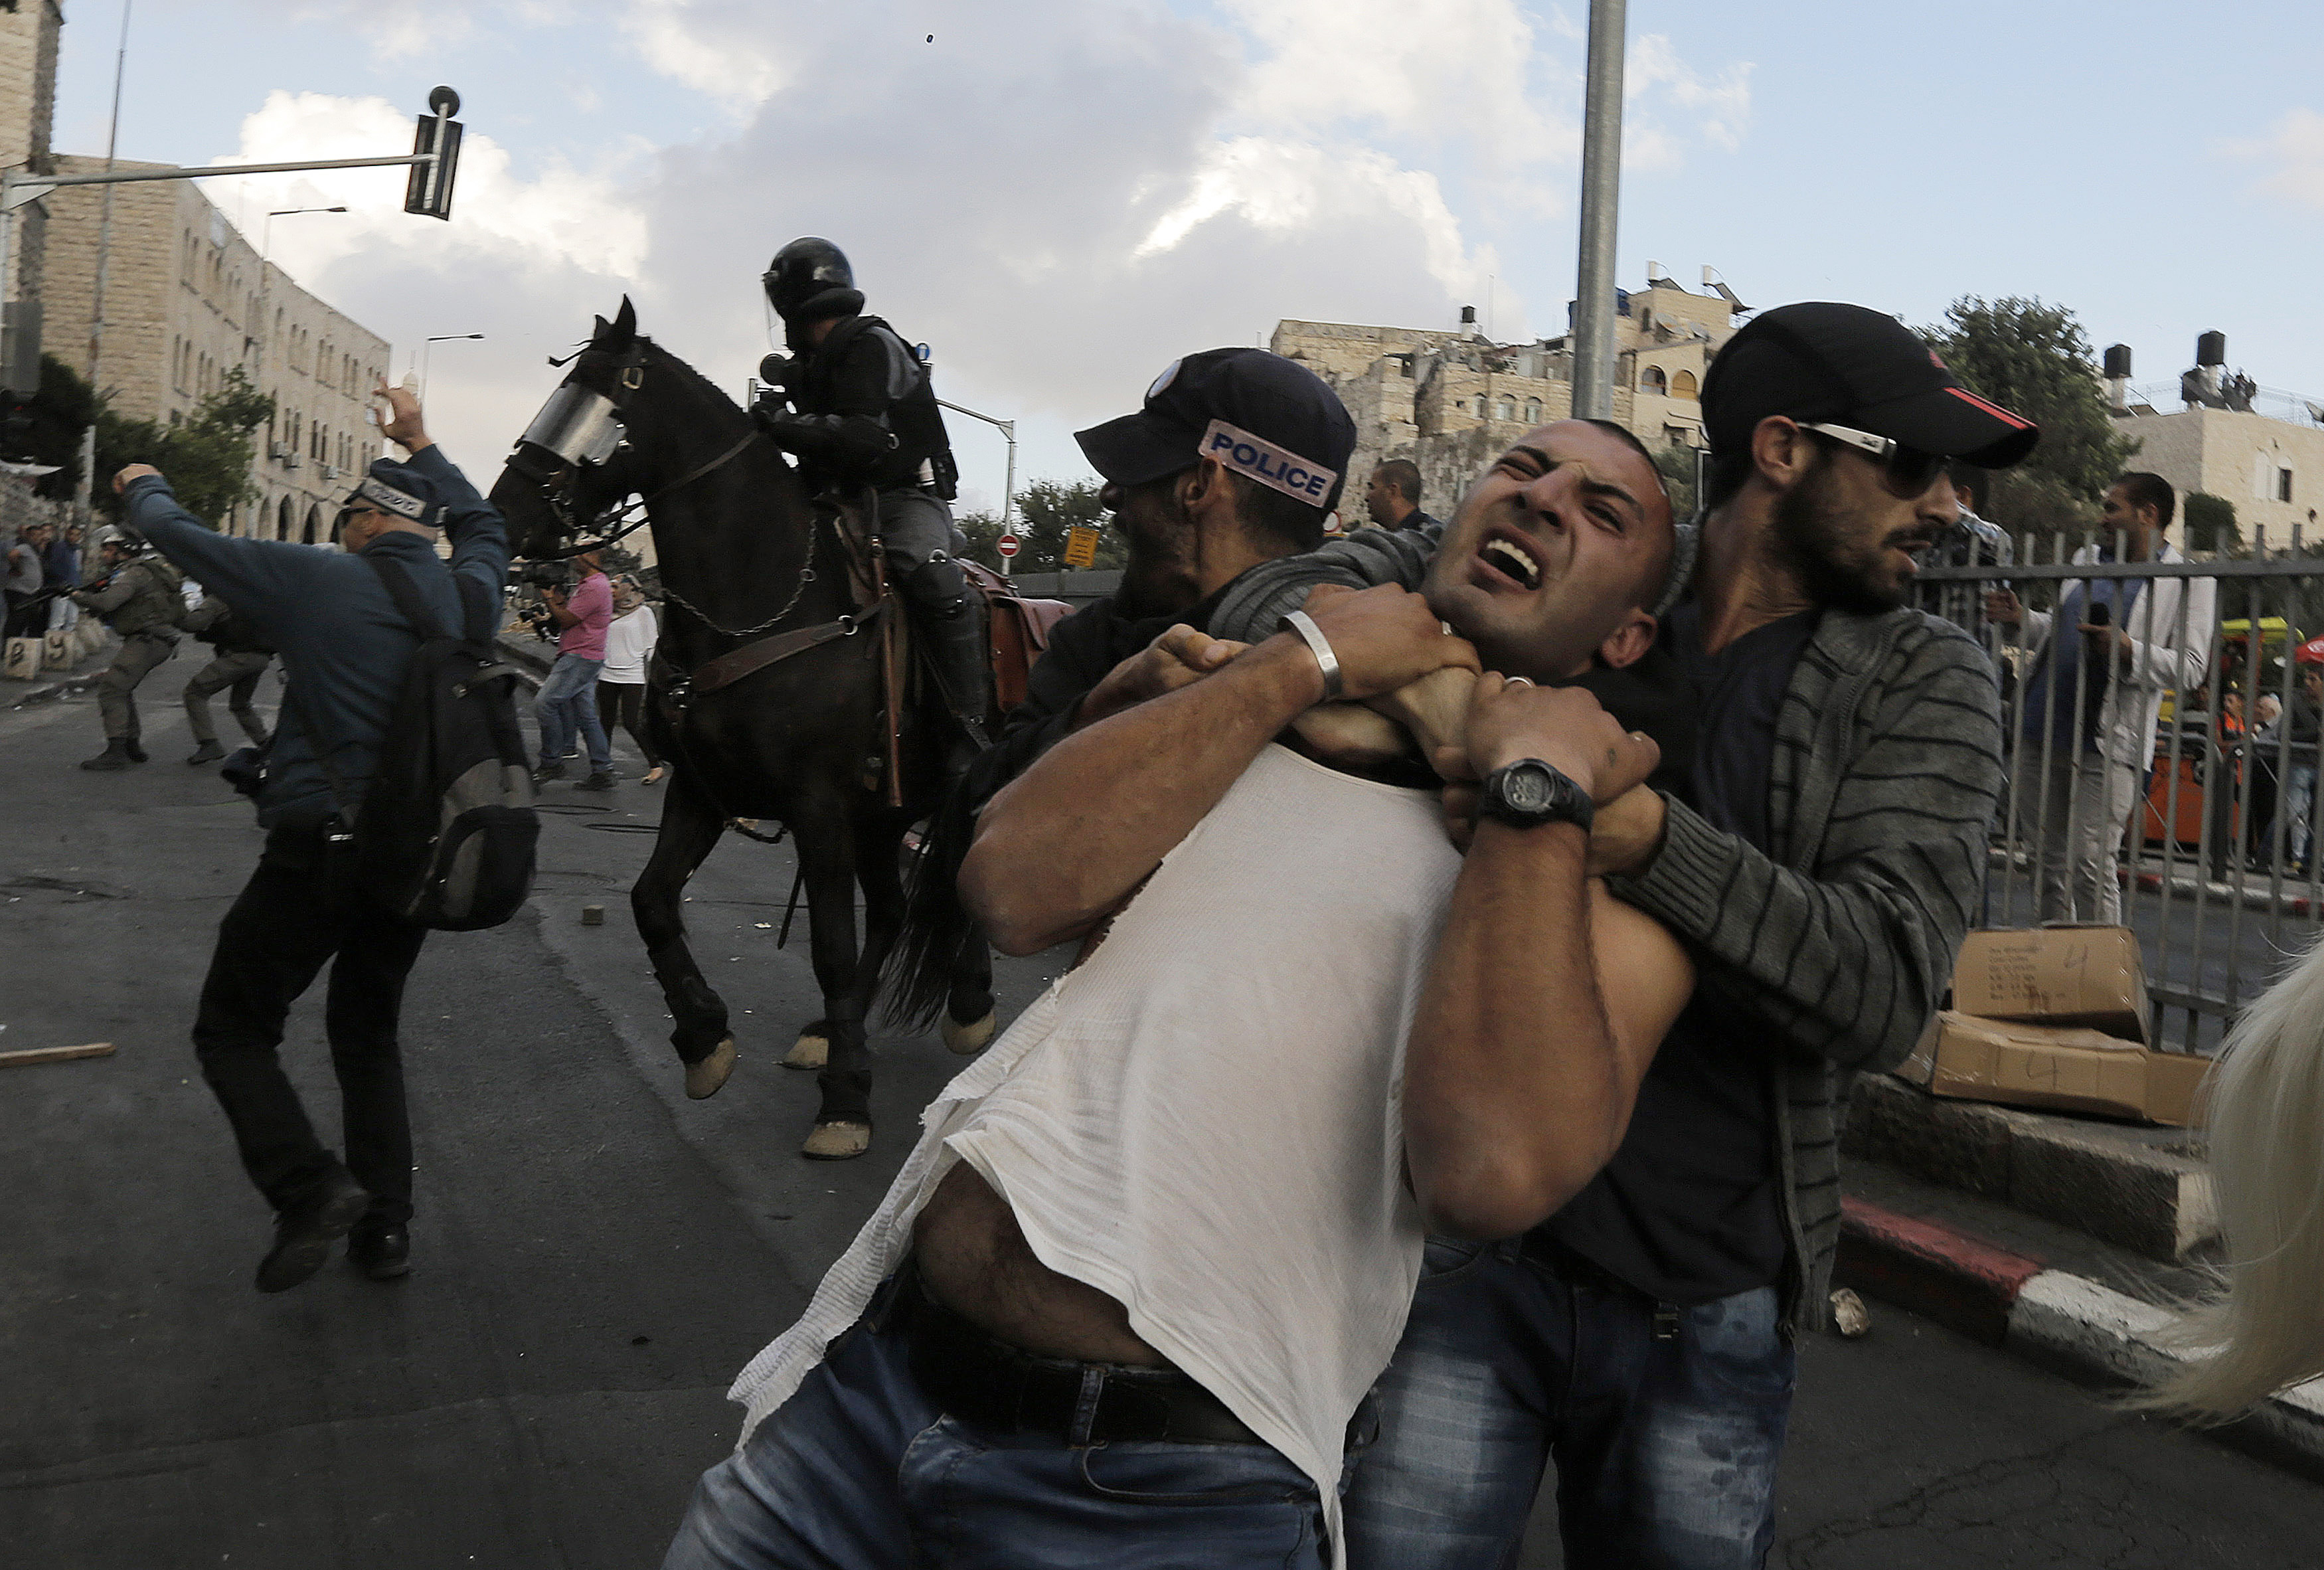 An undercover Israeli policeman detains a Palestinian protester during clashes at a demonstration near Damascus Gate in Jerusalem's Old City on 24 September 2013